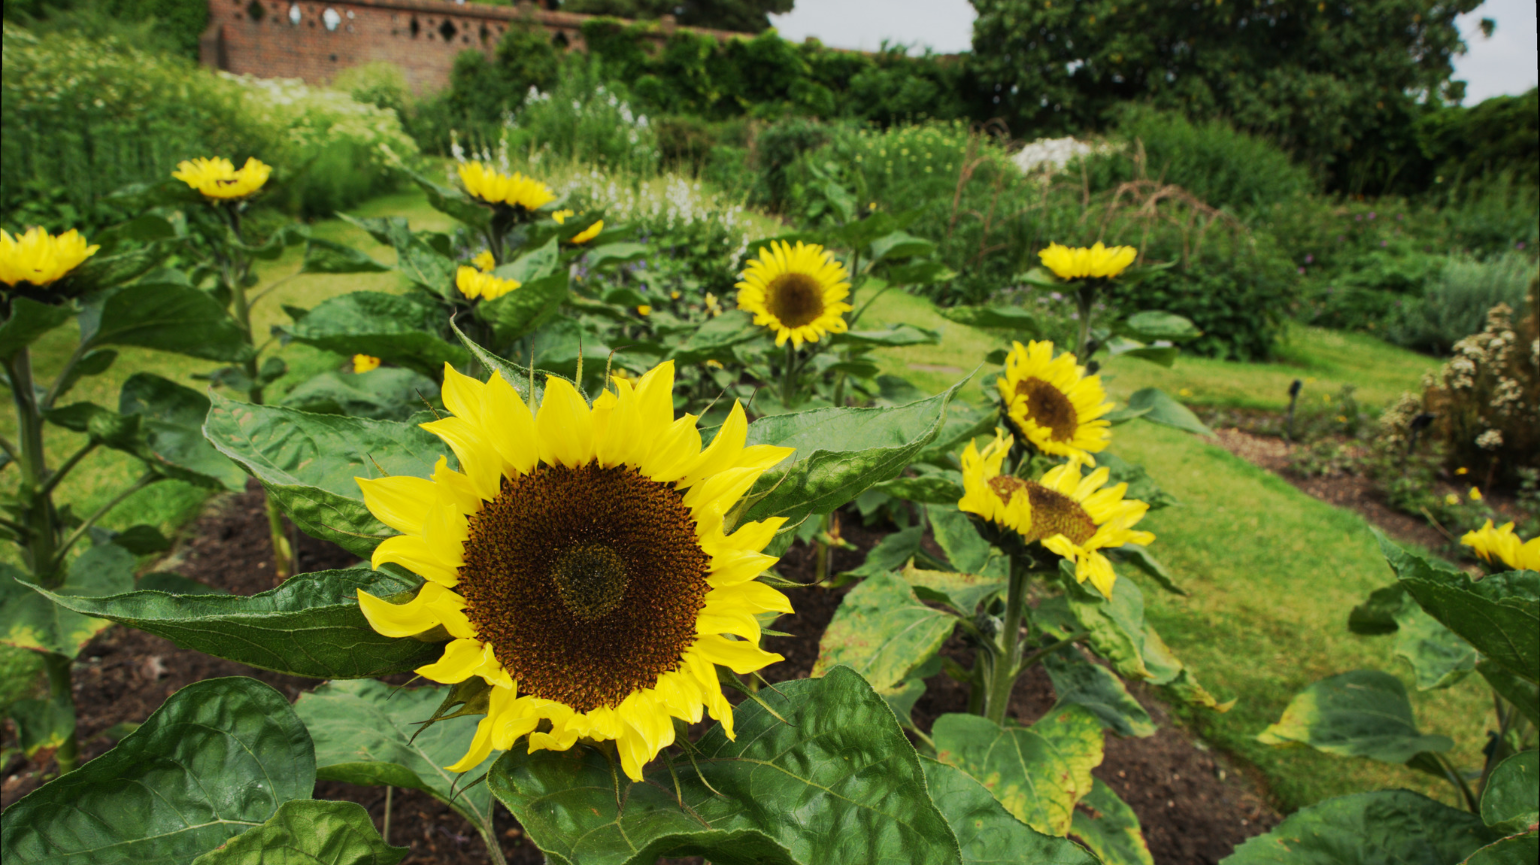 Several bright yellow sunflowers on a green background